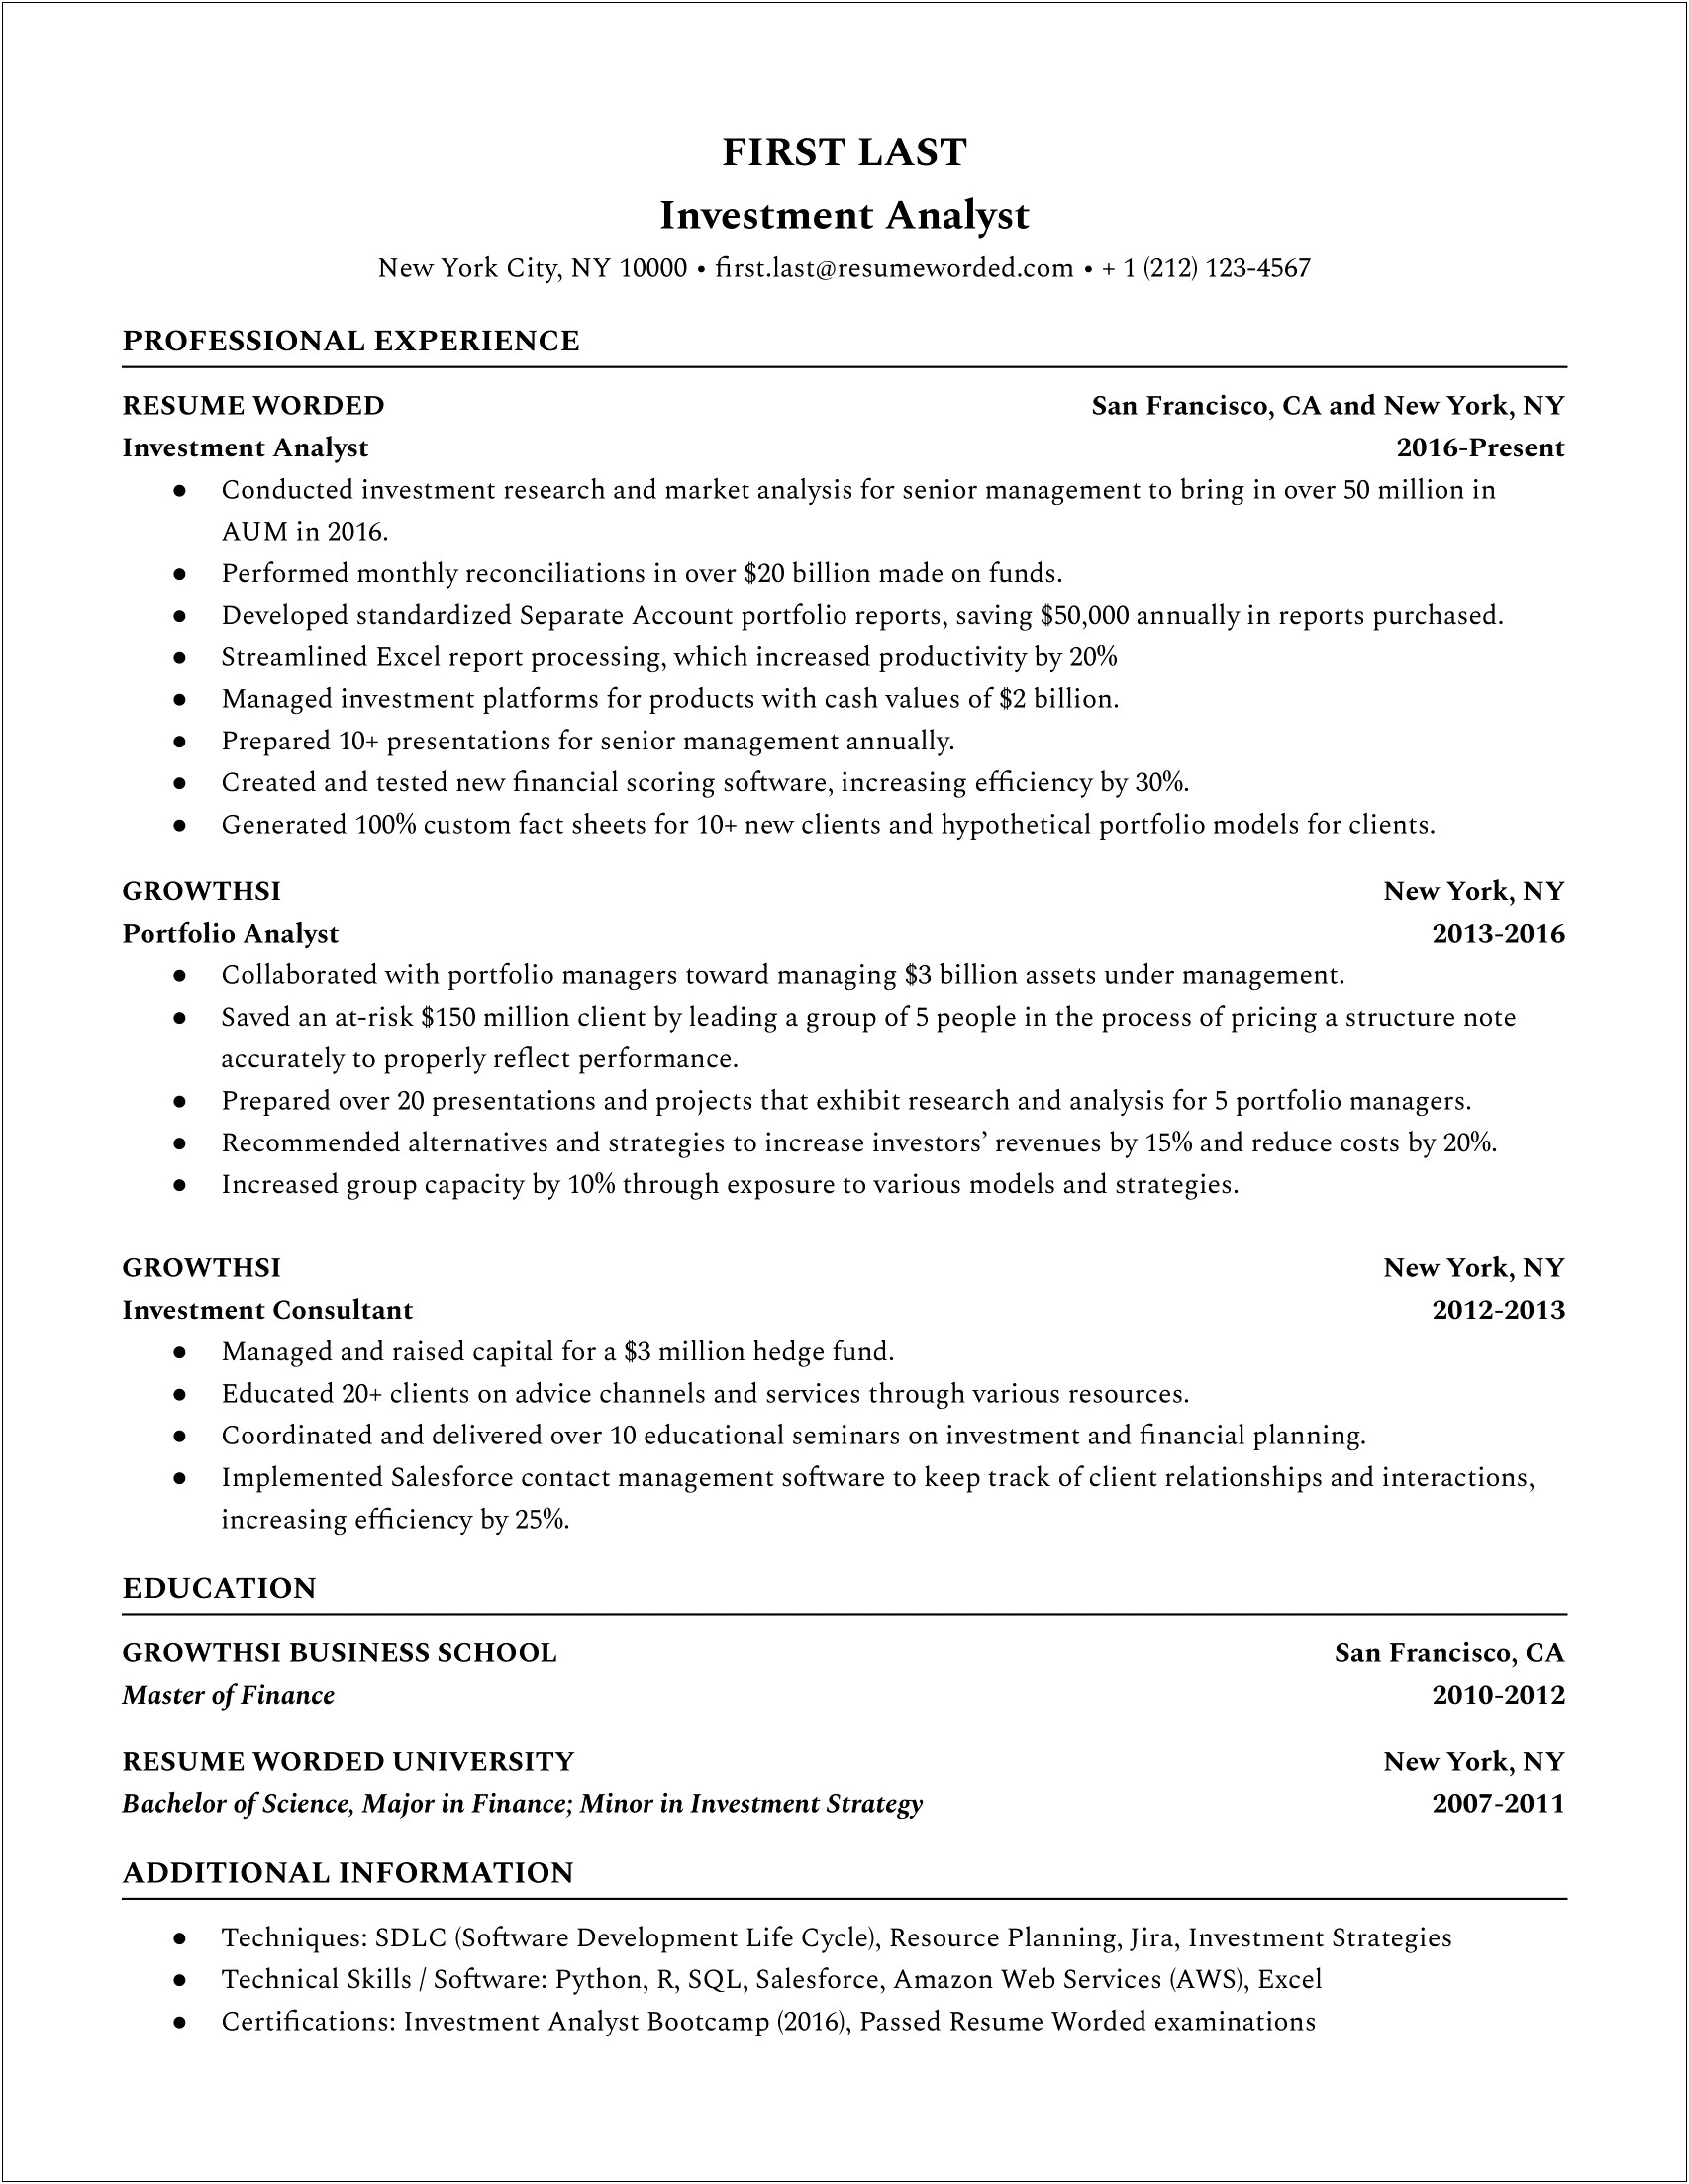 Sample Resume Of Senior Financial Analyst Fp&a